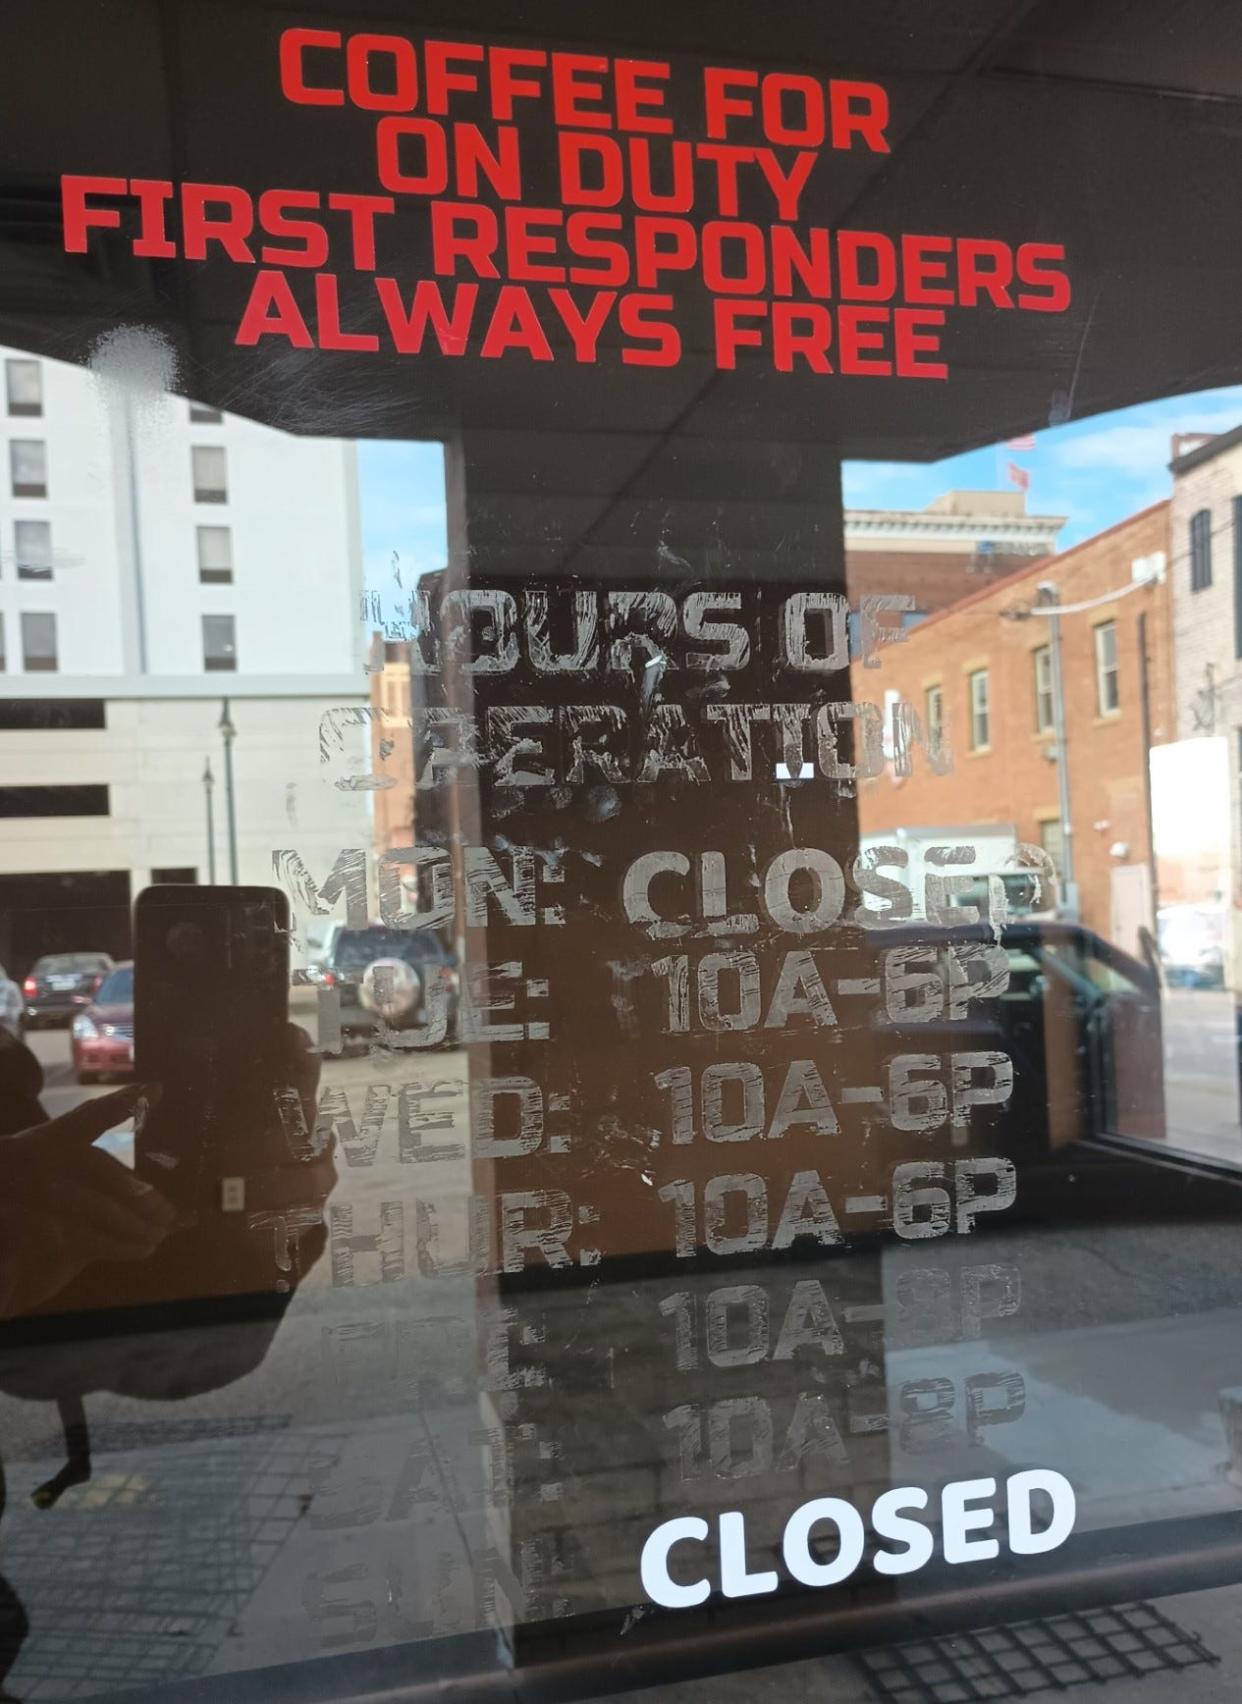 Information detailing the days and hours of operation for Caffeine & Gunpowder has been scratched off an outside window of the downtown Massillon business. The only legible marking says "closed."